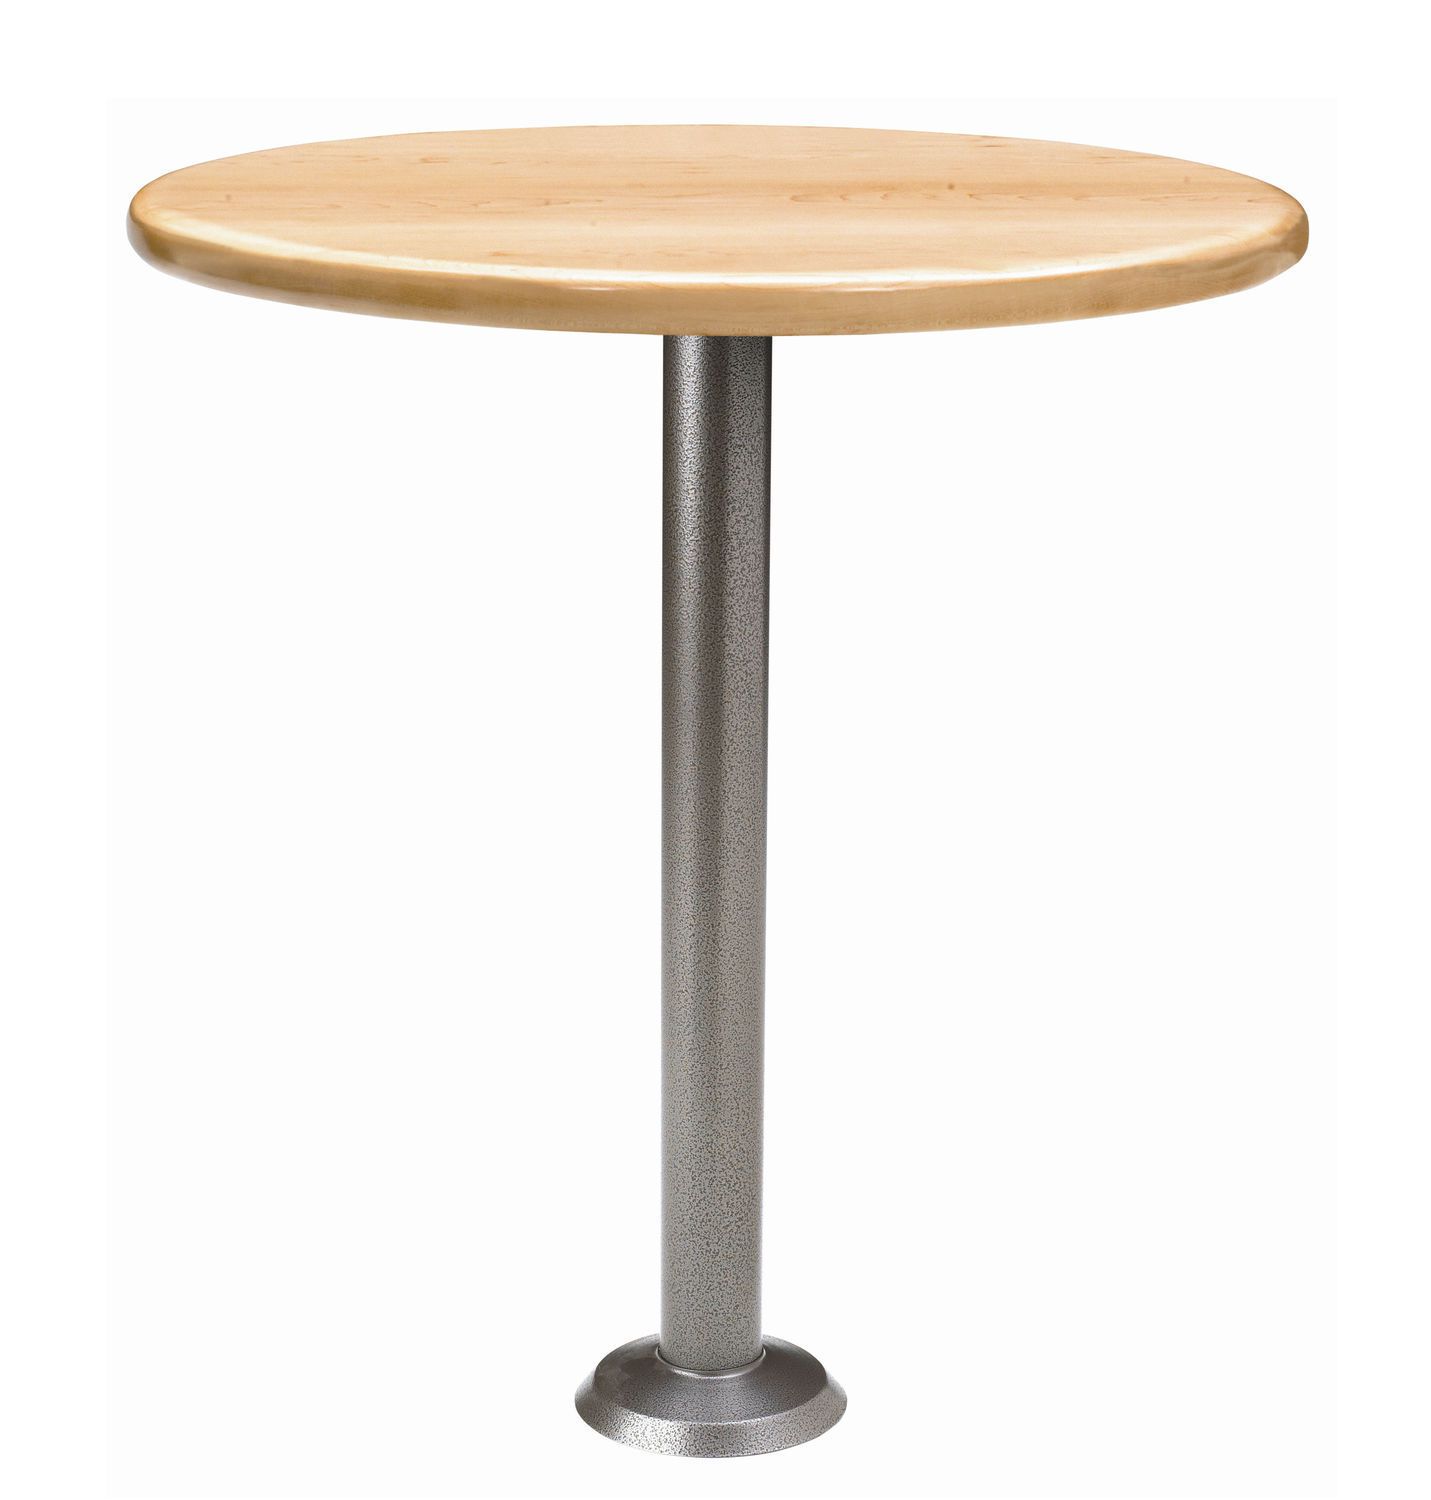 Healthcare facility coffee table / round Core Drilled/Bolt Down Grand Rapids Chair